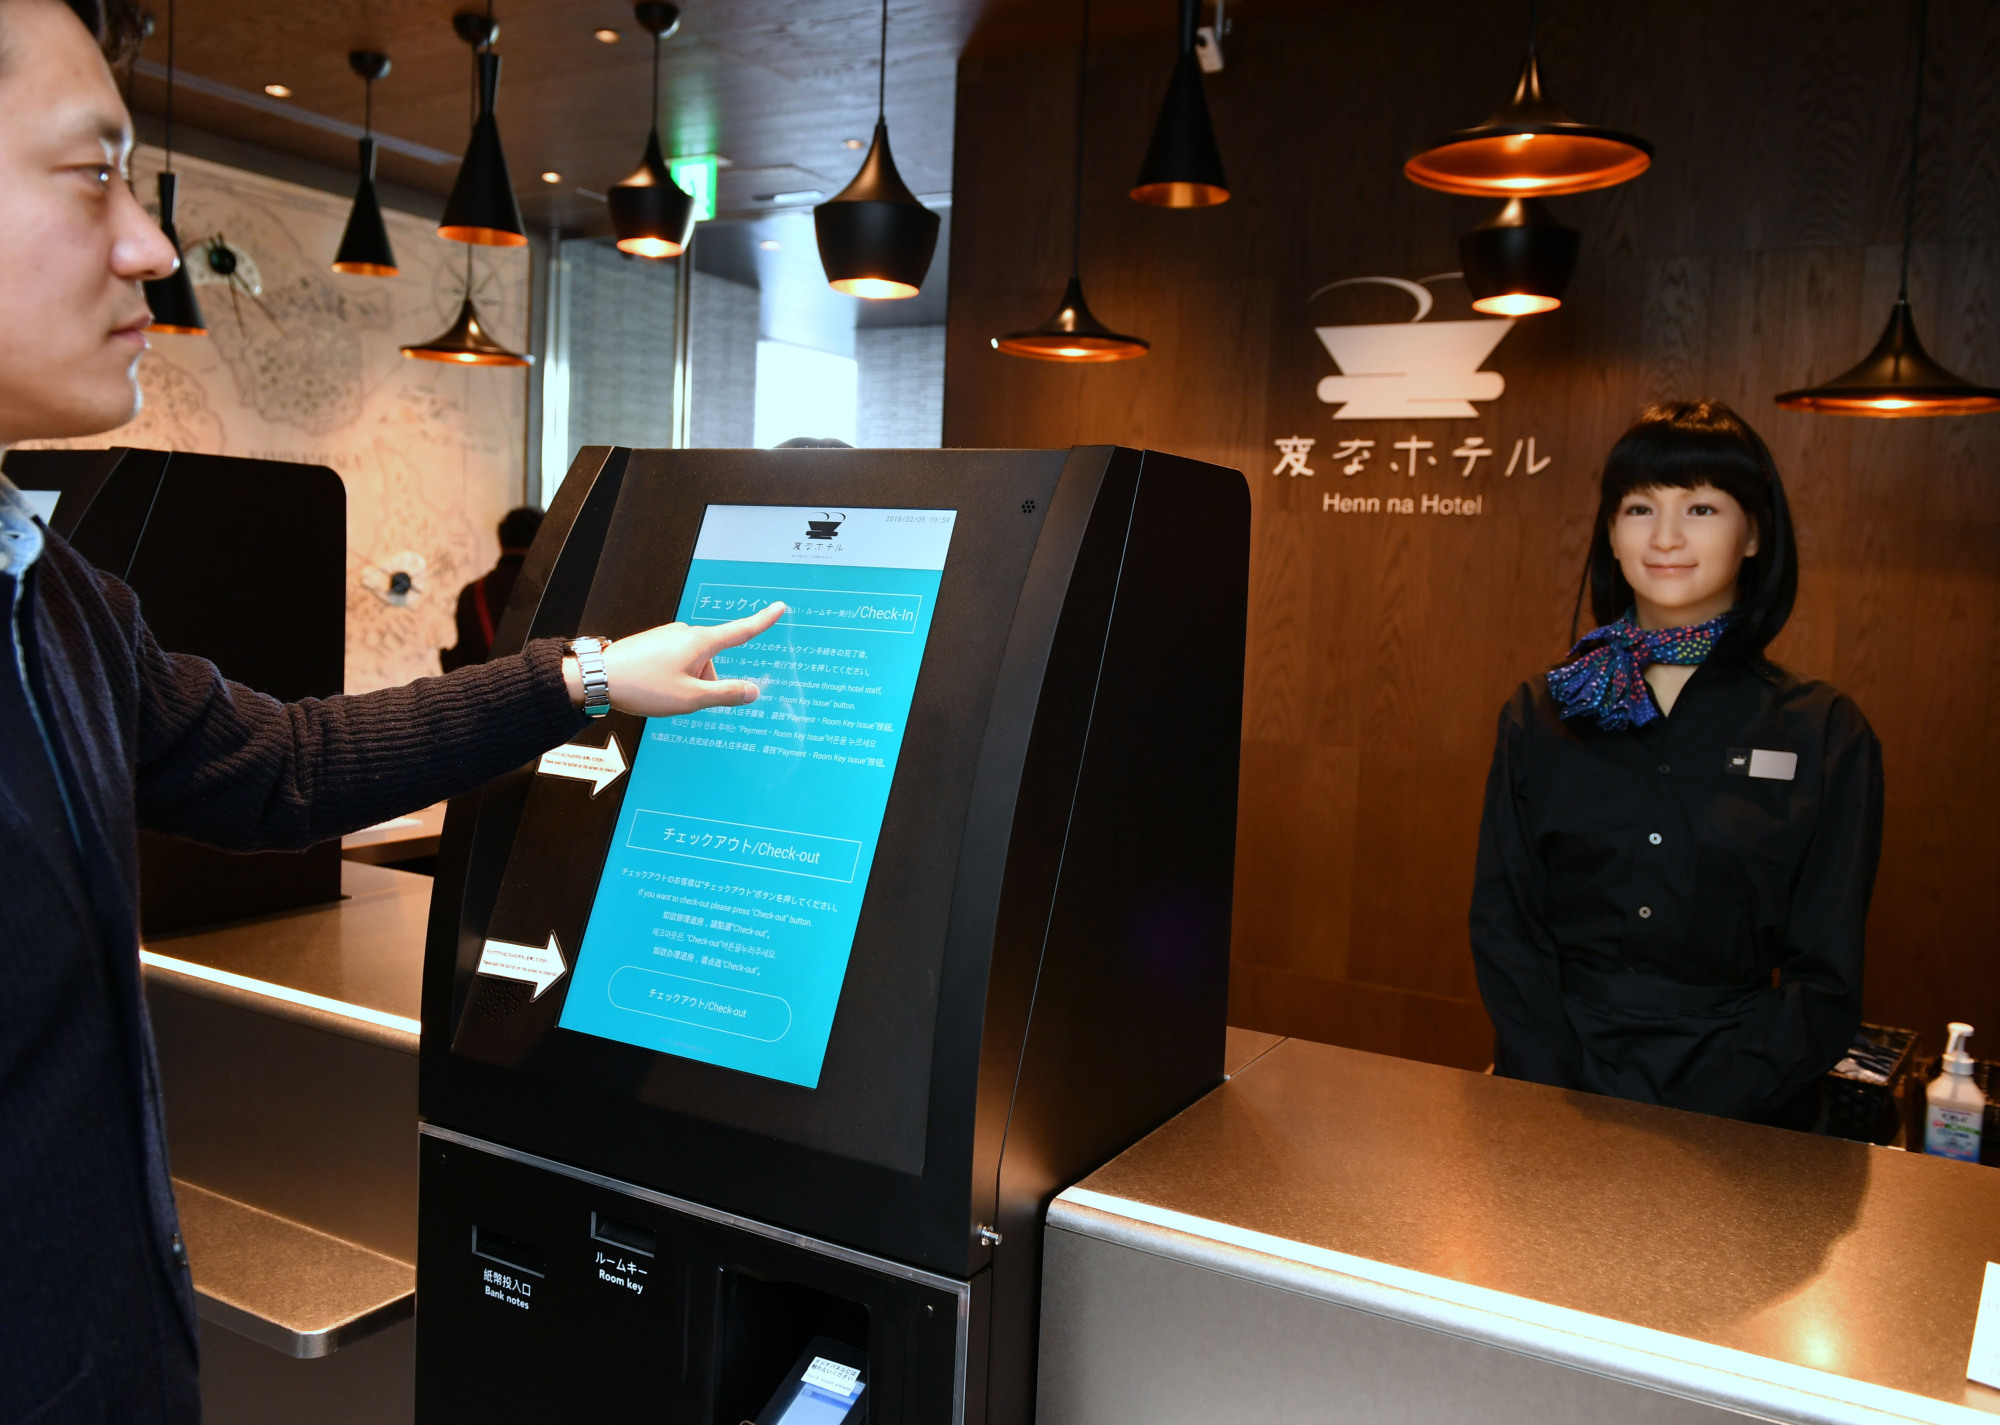 An android serves as a receptionist at the new Henn na Hotel that opened Thursday in Tokyo's Ginza district. | YOSHIAKI MIURA